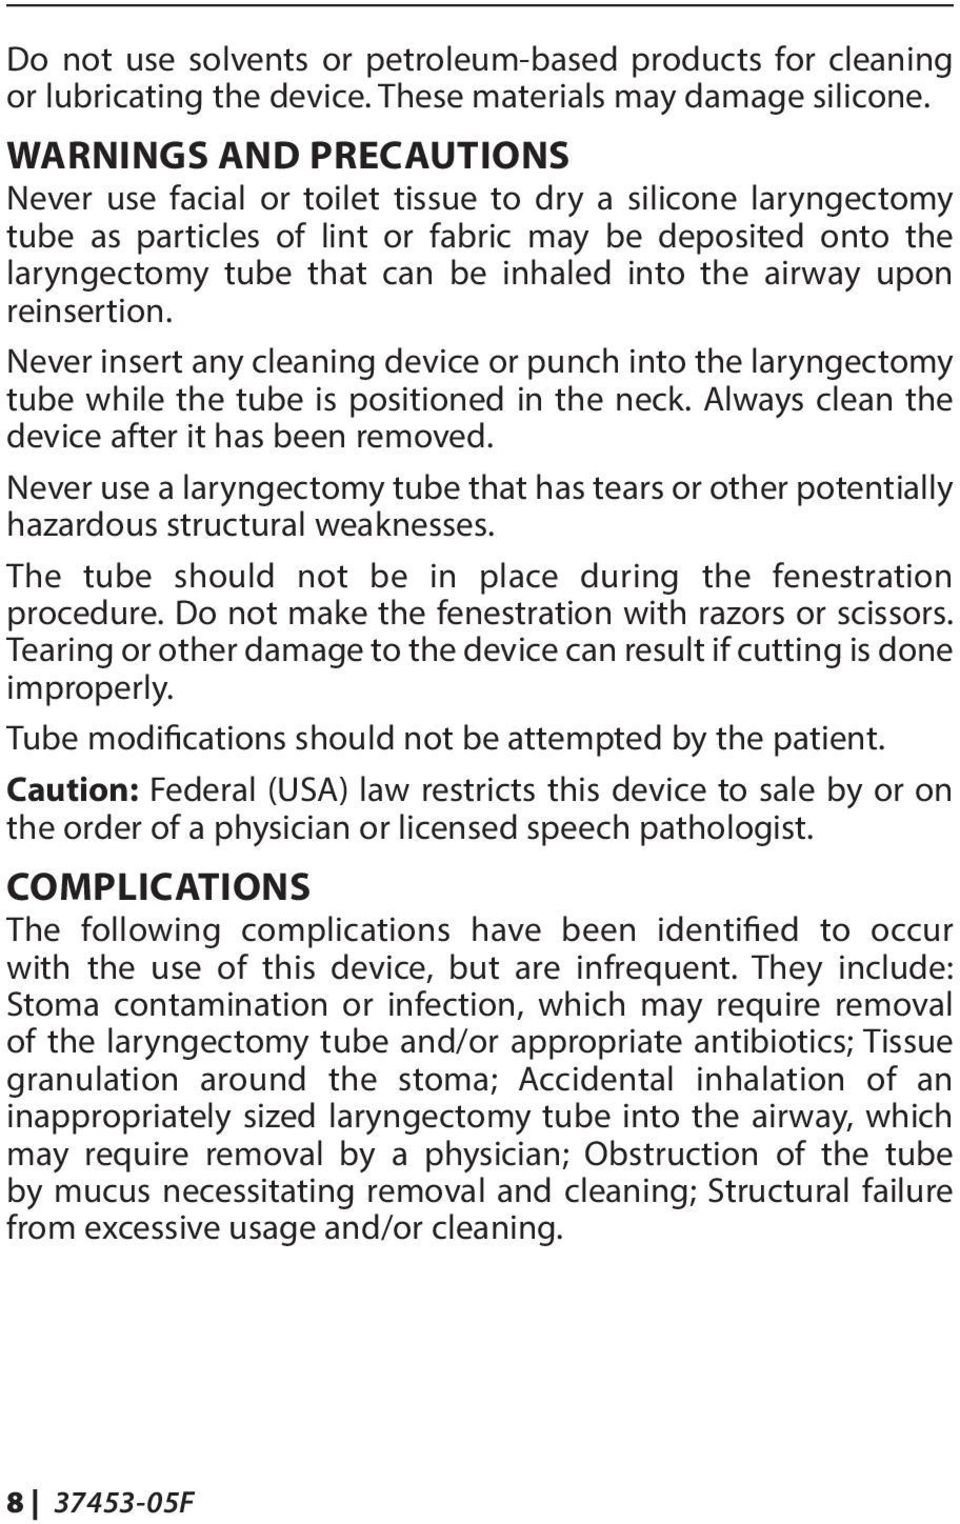 airway upon reinsertion. Never insert any cleaning device or punch into the laryngectomy tube while the tube is positioned in the neck. Always clean the device after it has been removed.